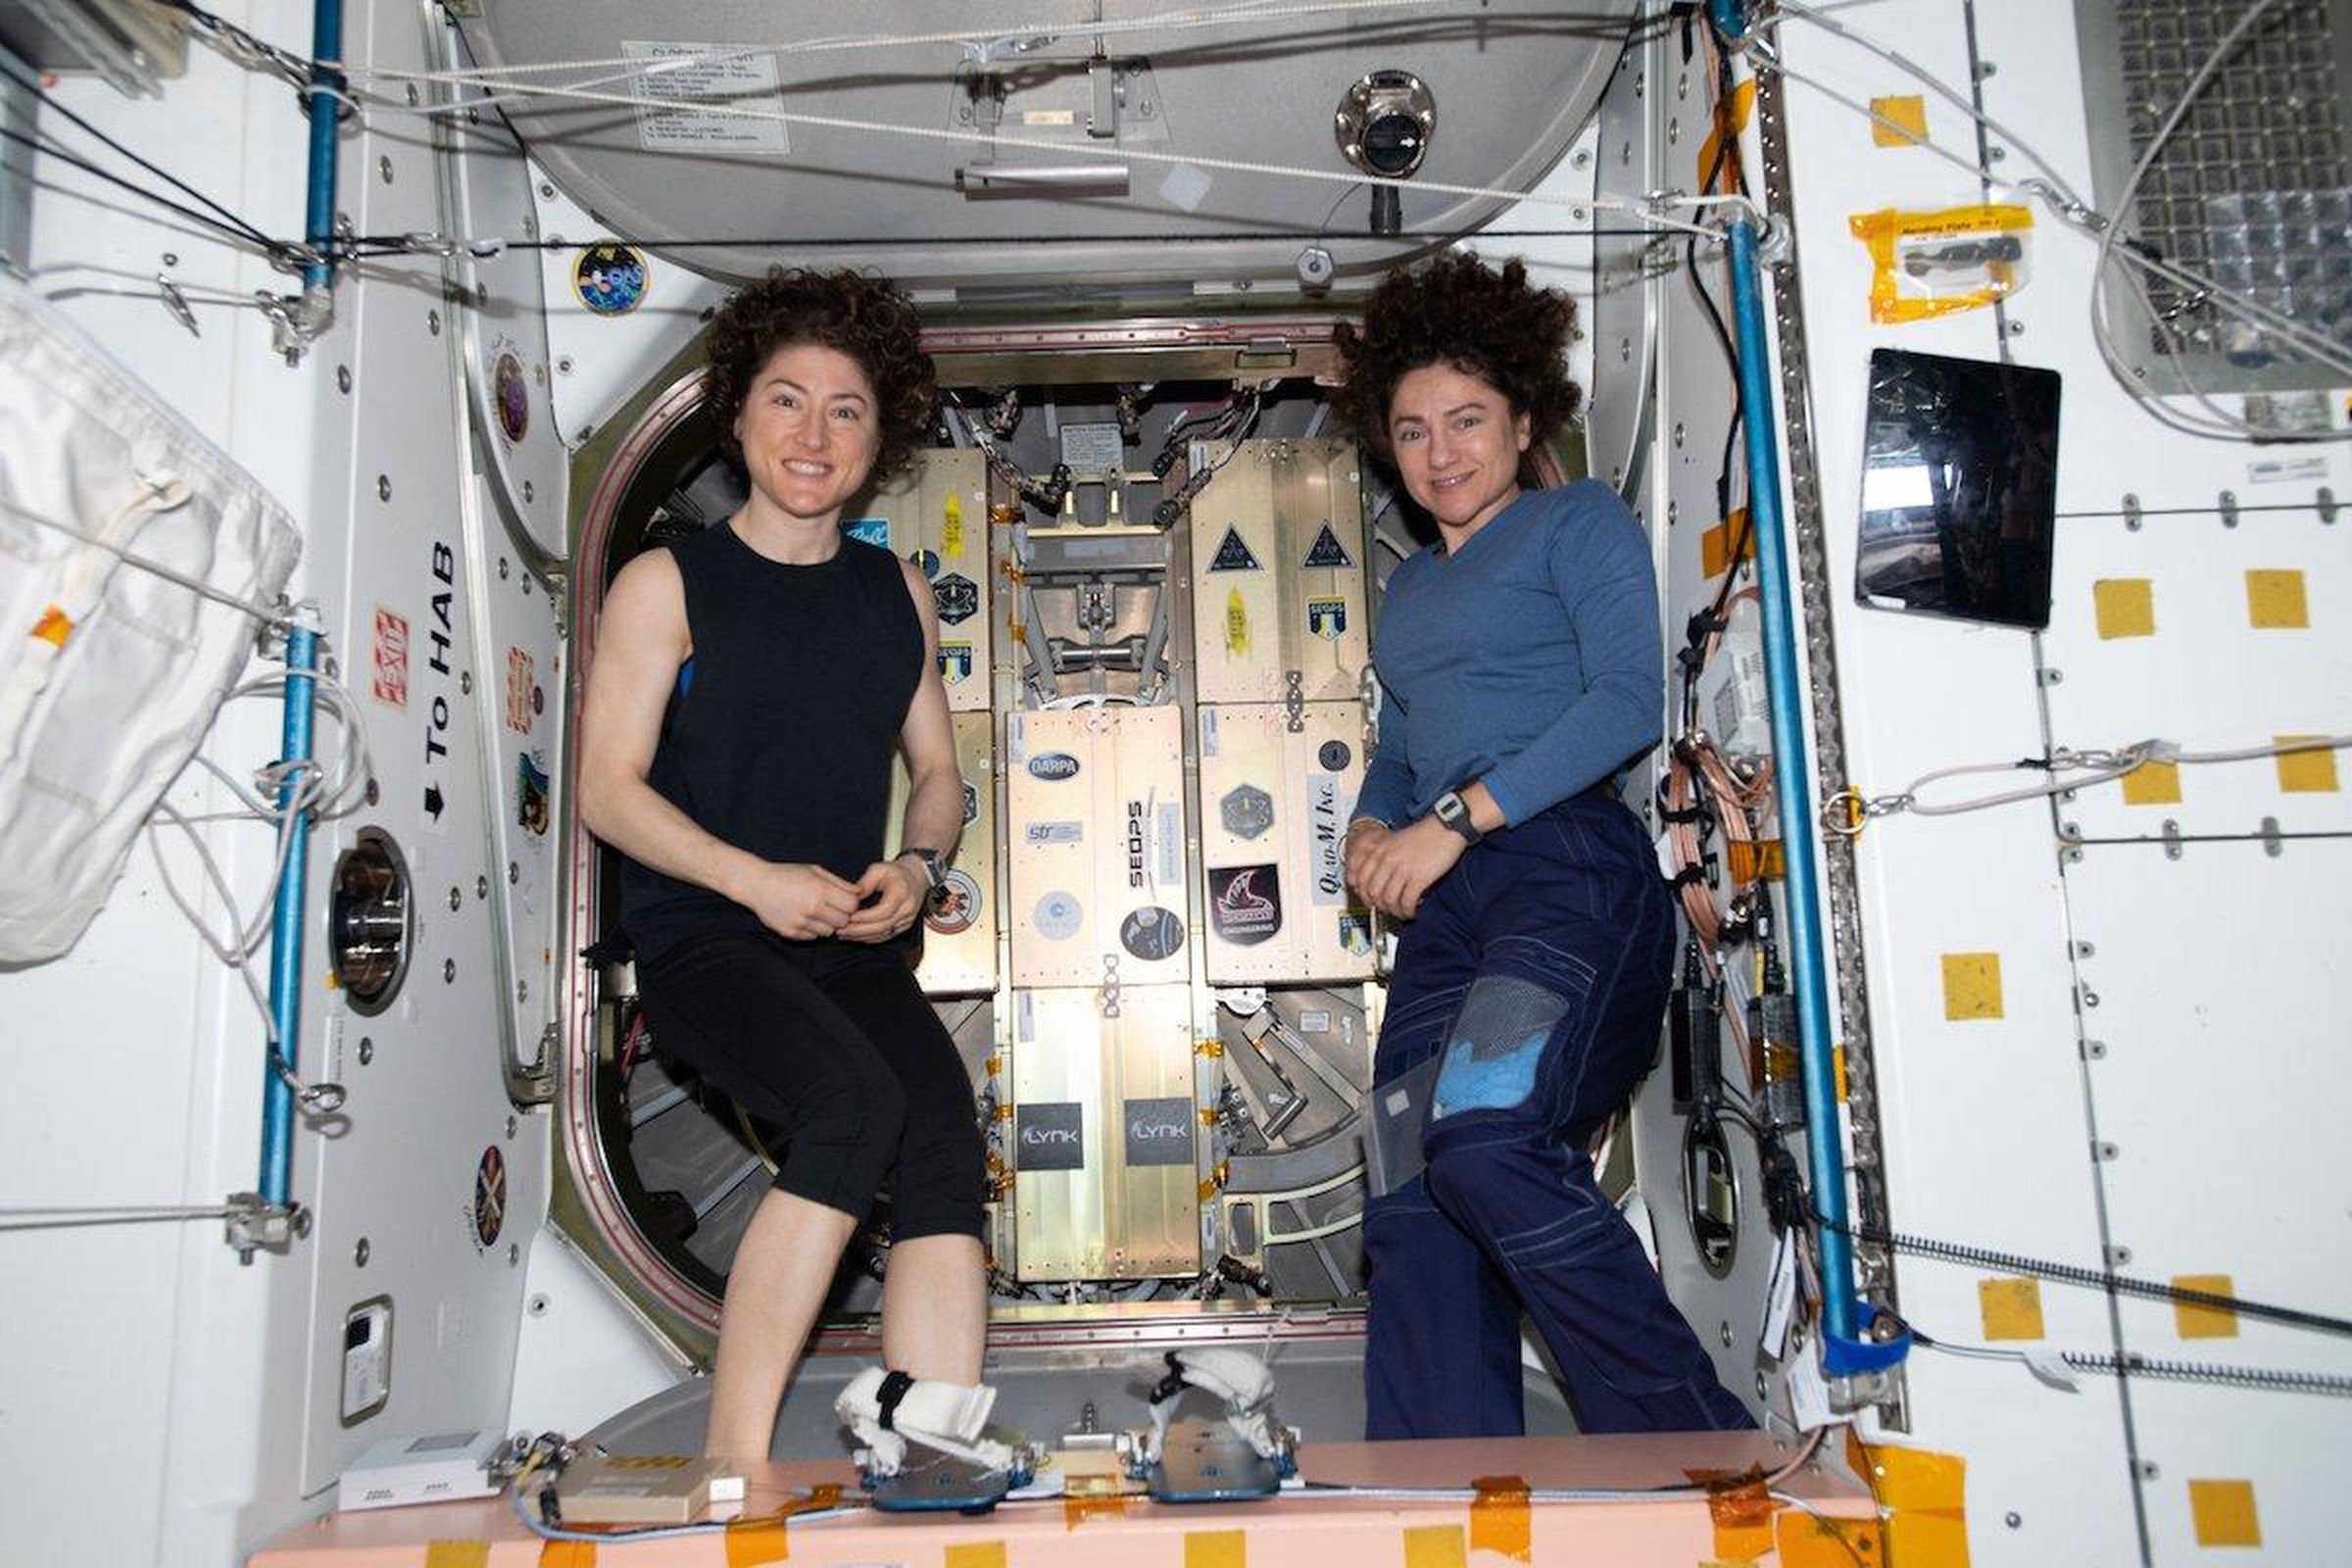 NASA astronauts Christina Koch (L) and Jessica Meir (R) after attaching the Lynk payload to the Cygnus cargo capsule